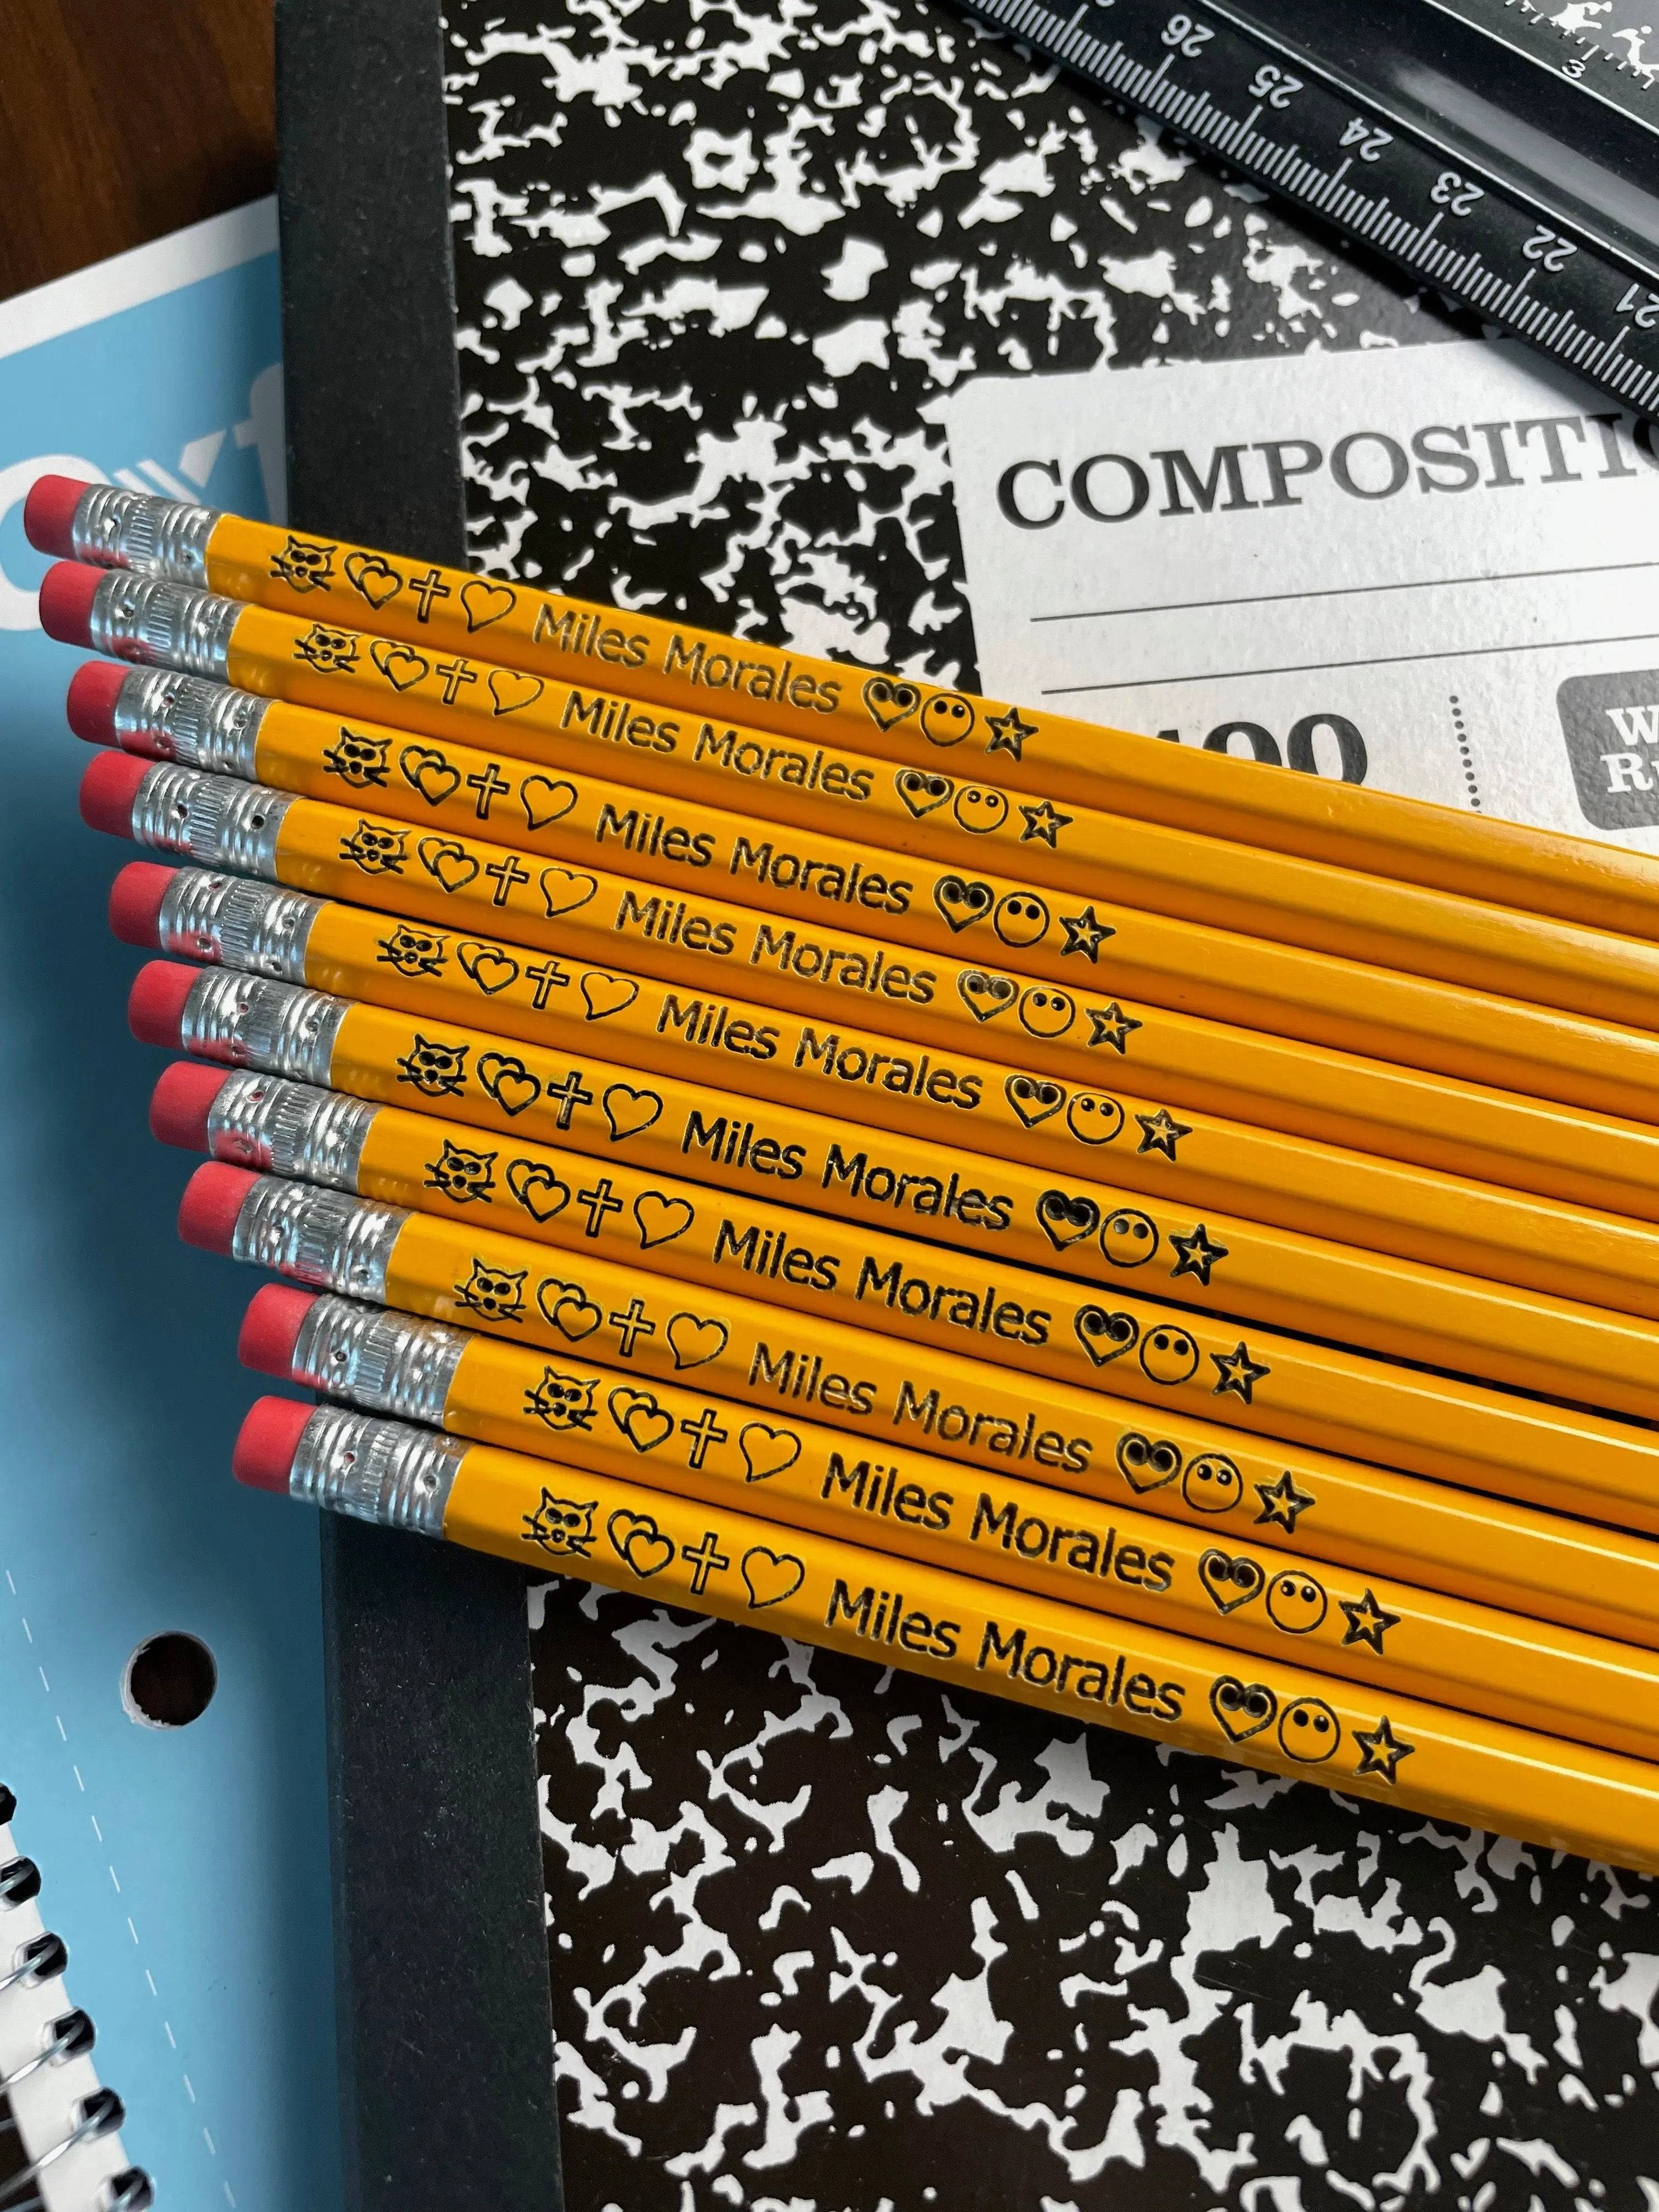 Personalized Pencils 8-Yellow #2 HB With optional Glow-In-The-Dark Name, School, or Business